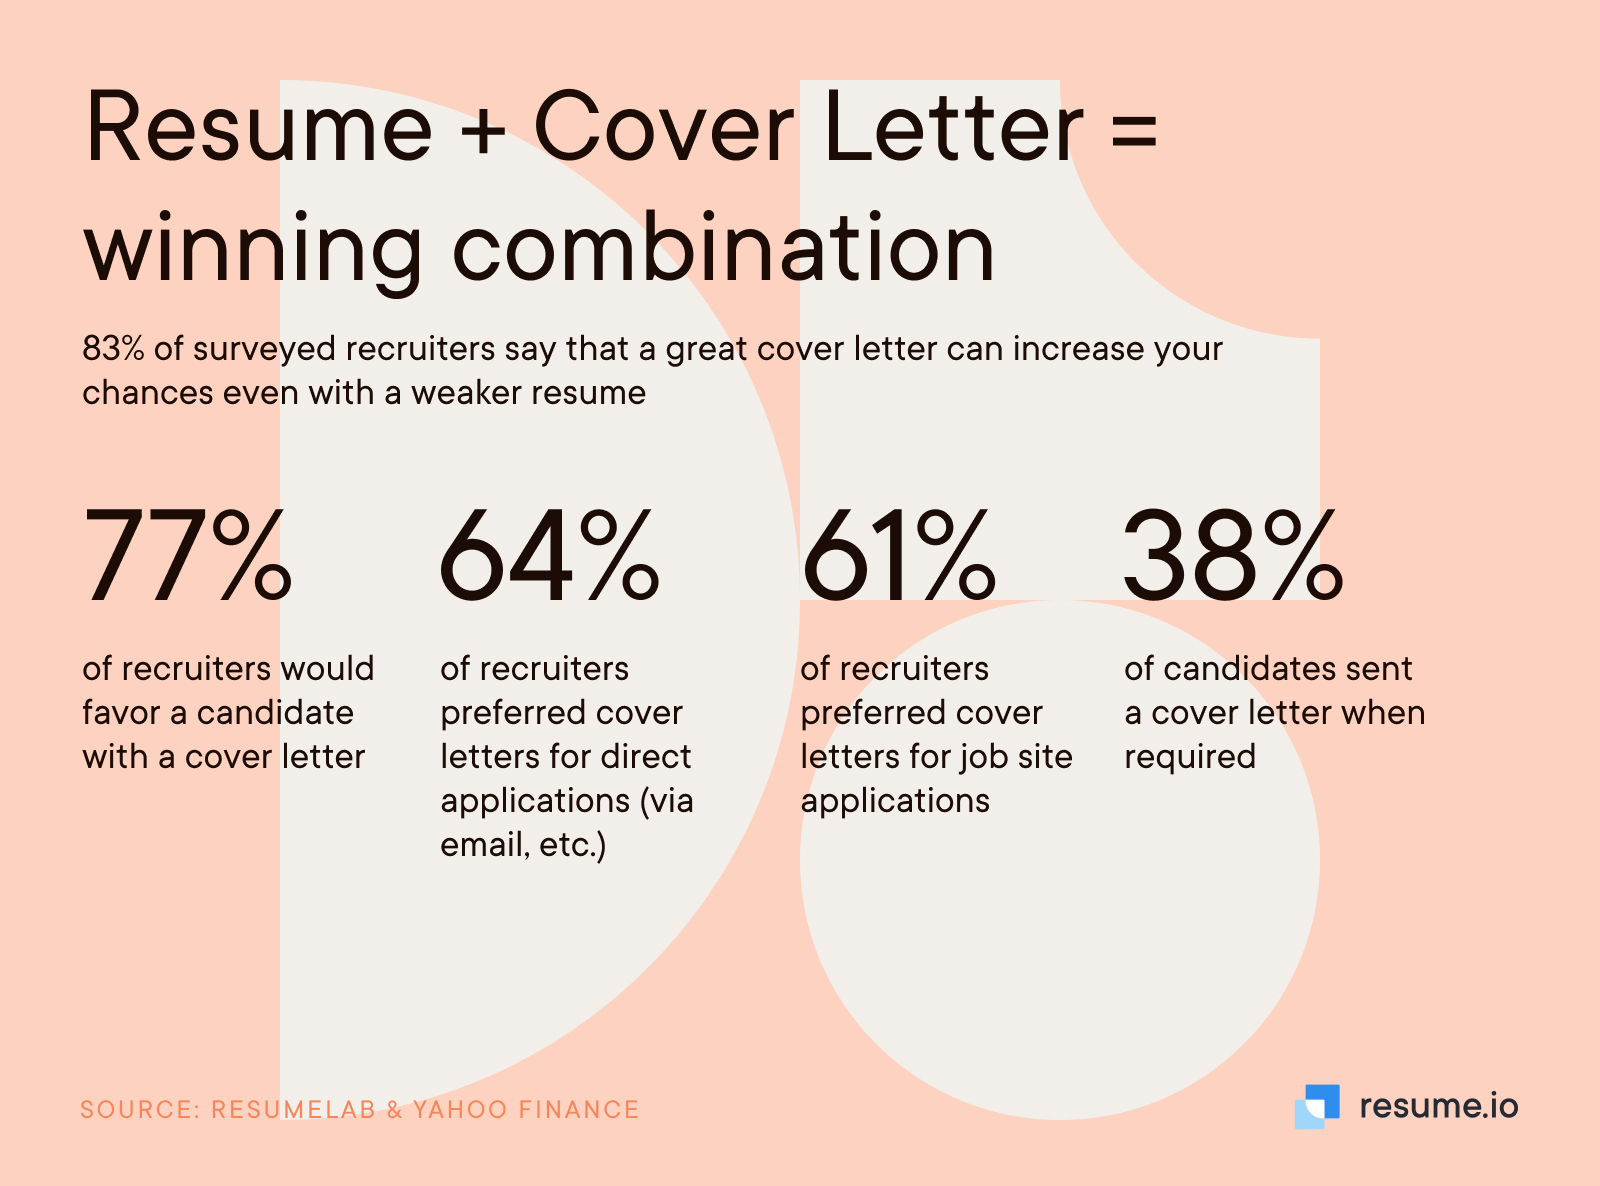 Resume and a cover letter are a winning combination